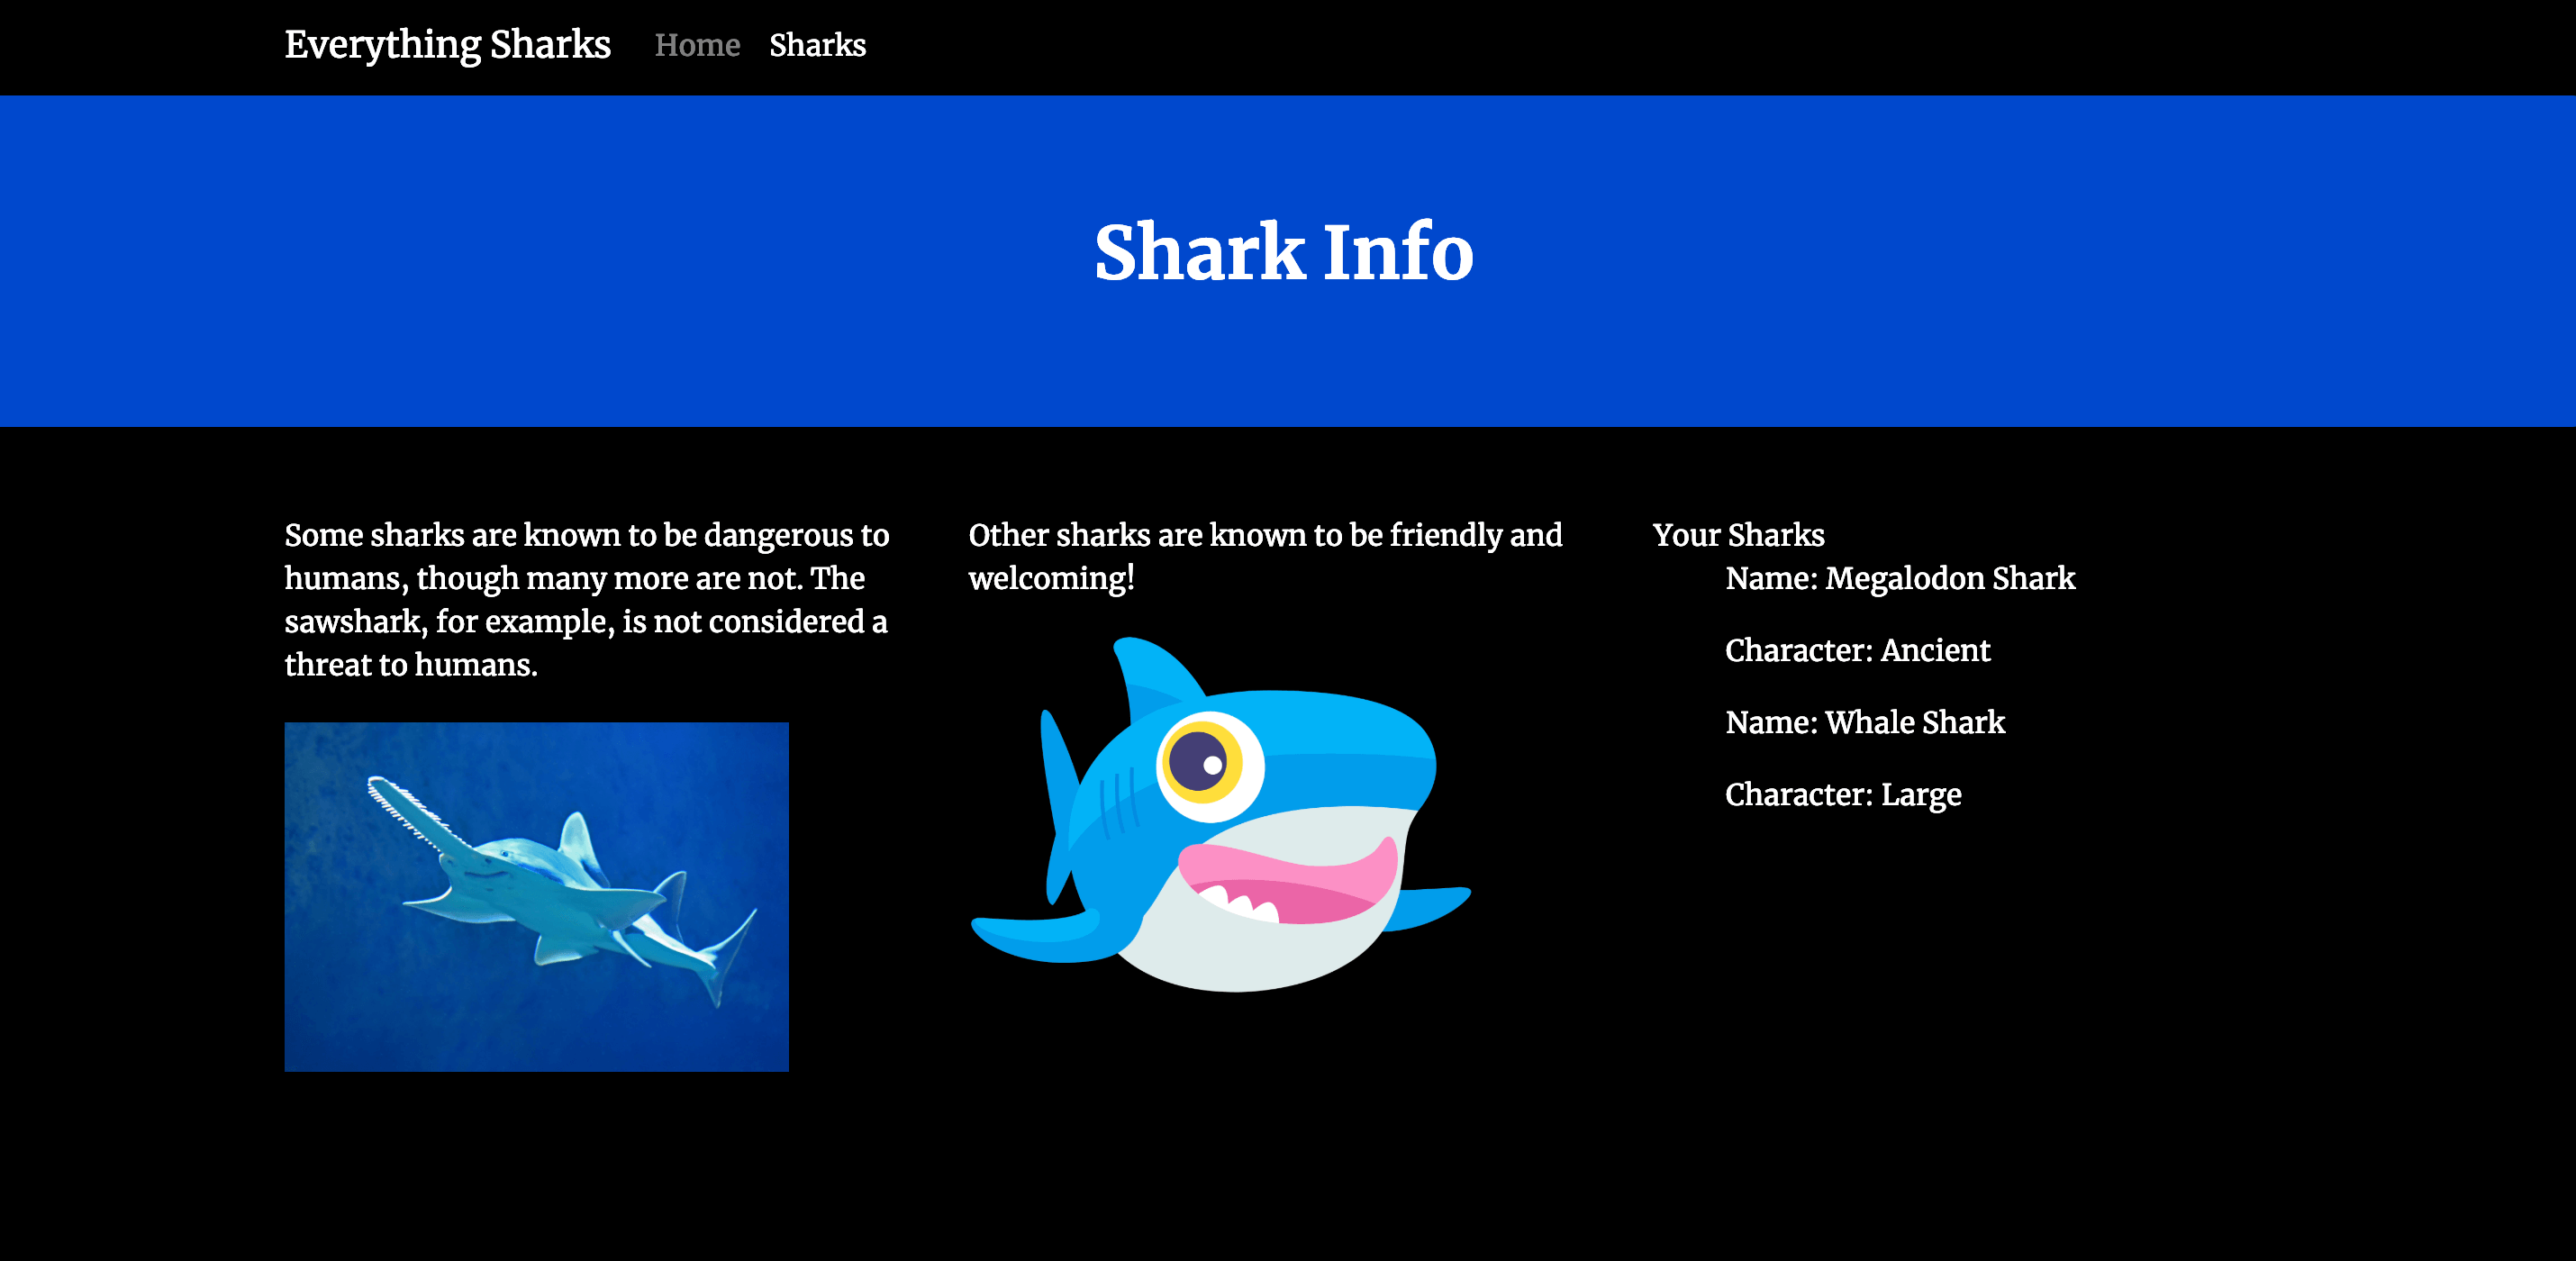 Complete Shark Collection landing page